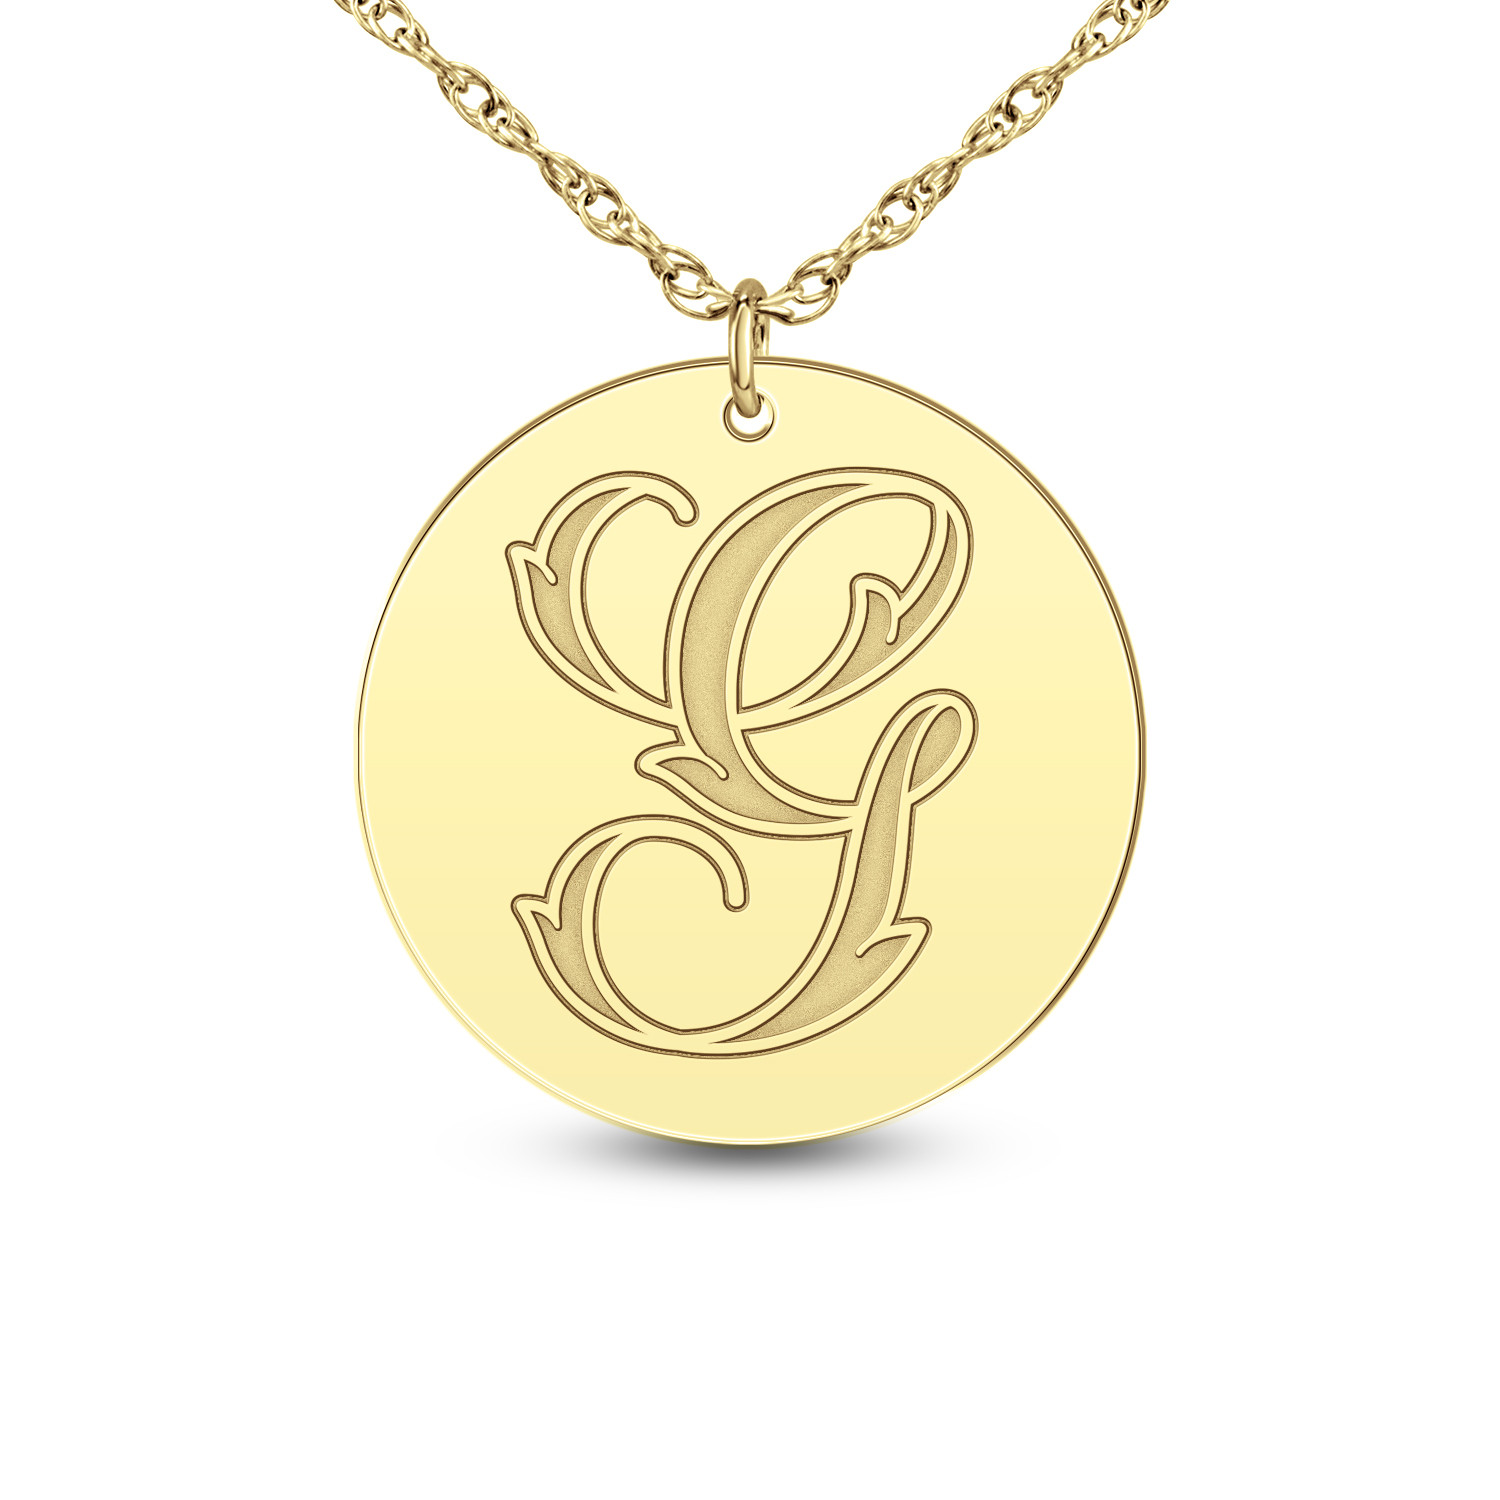 1 2 3 4 Circle Initial Pendant Necklace, Customized Small Disc Necklace, Family, Sister Necklace, Mother, Couple Jewelry 14K Gold Fill, Sterling